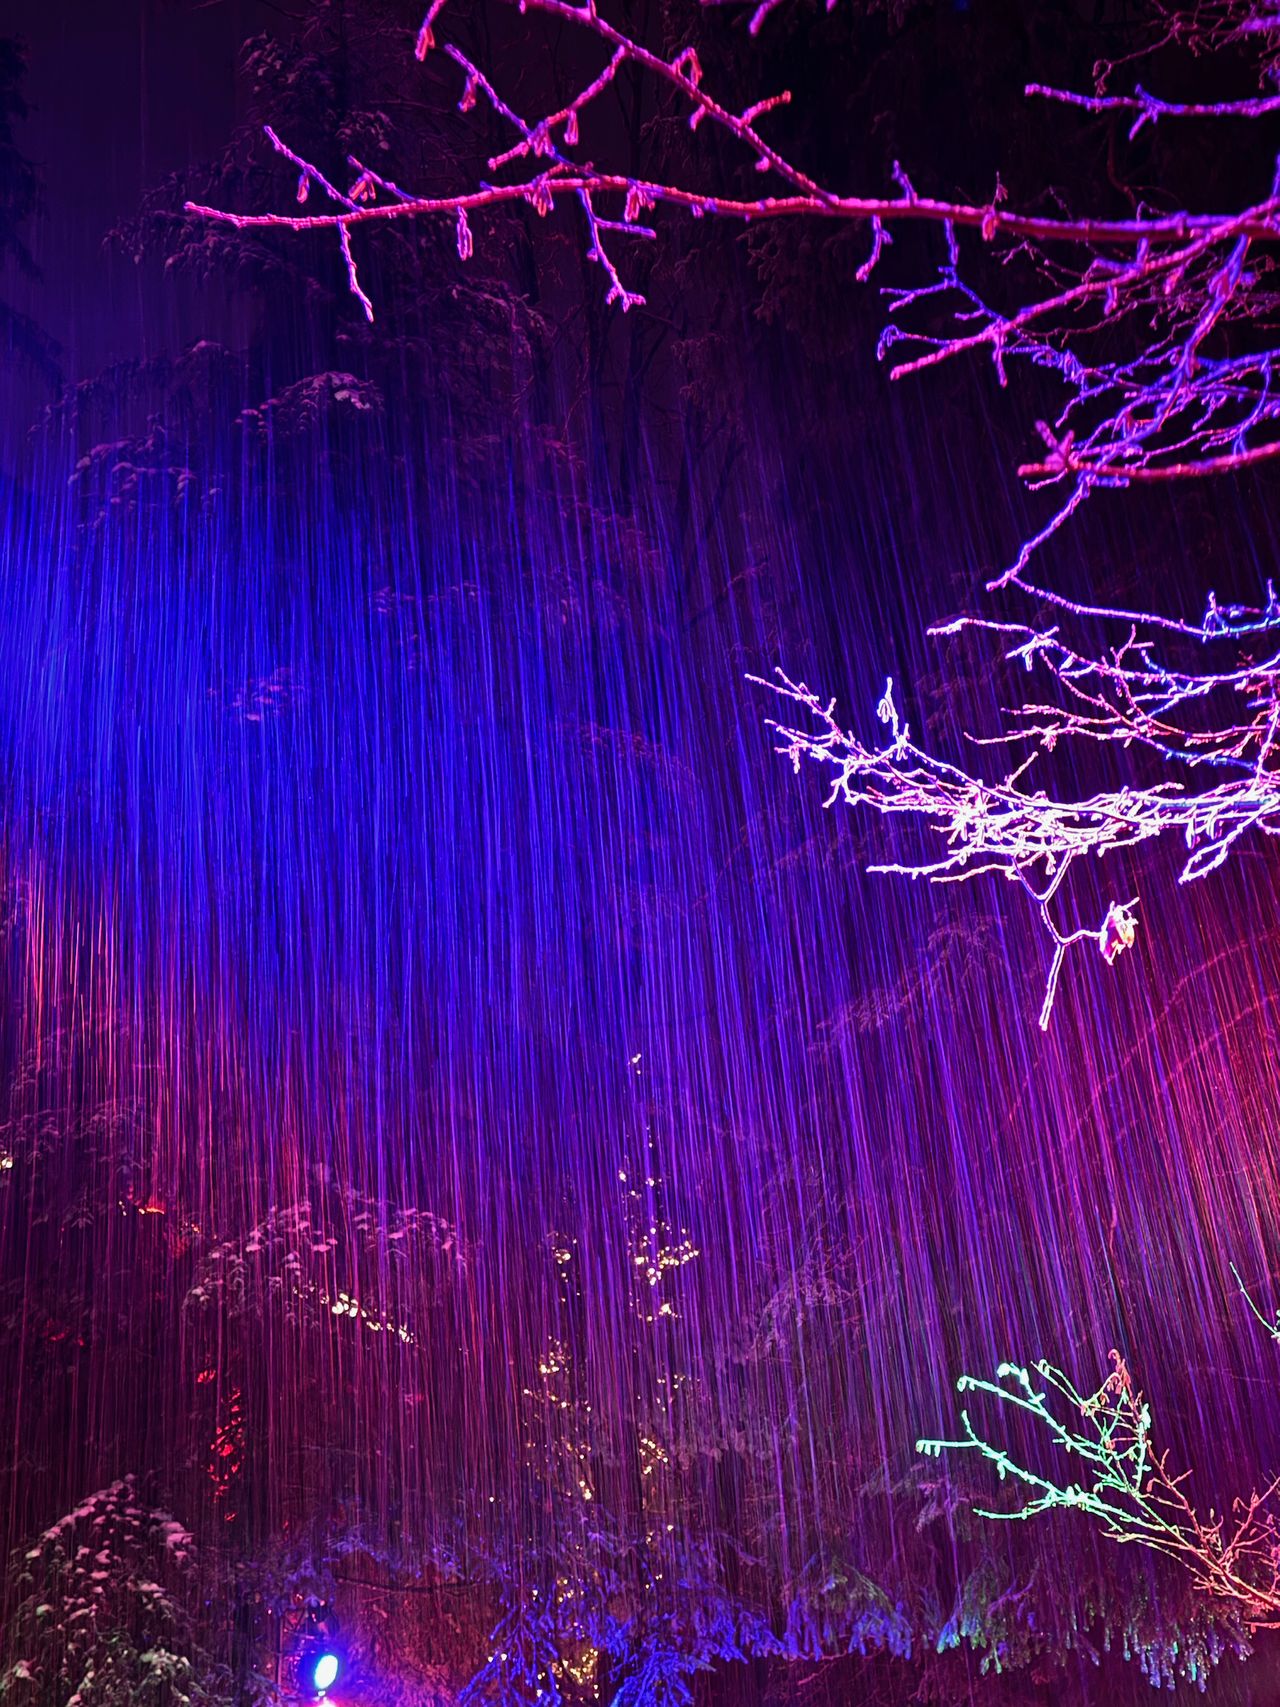 Long exposure of the night sky with streaks of snow fall.